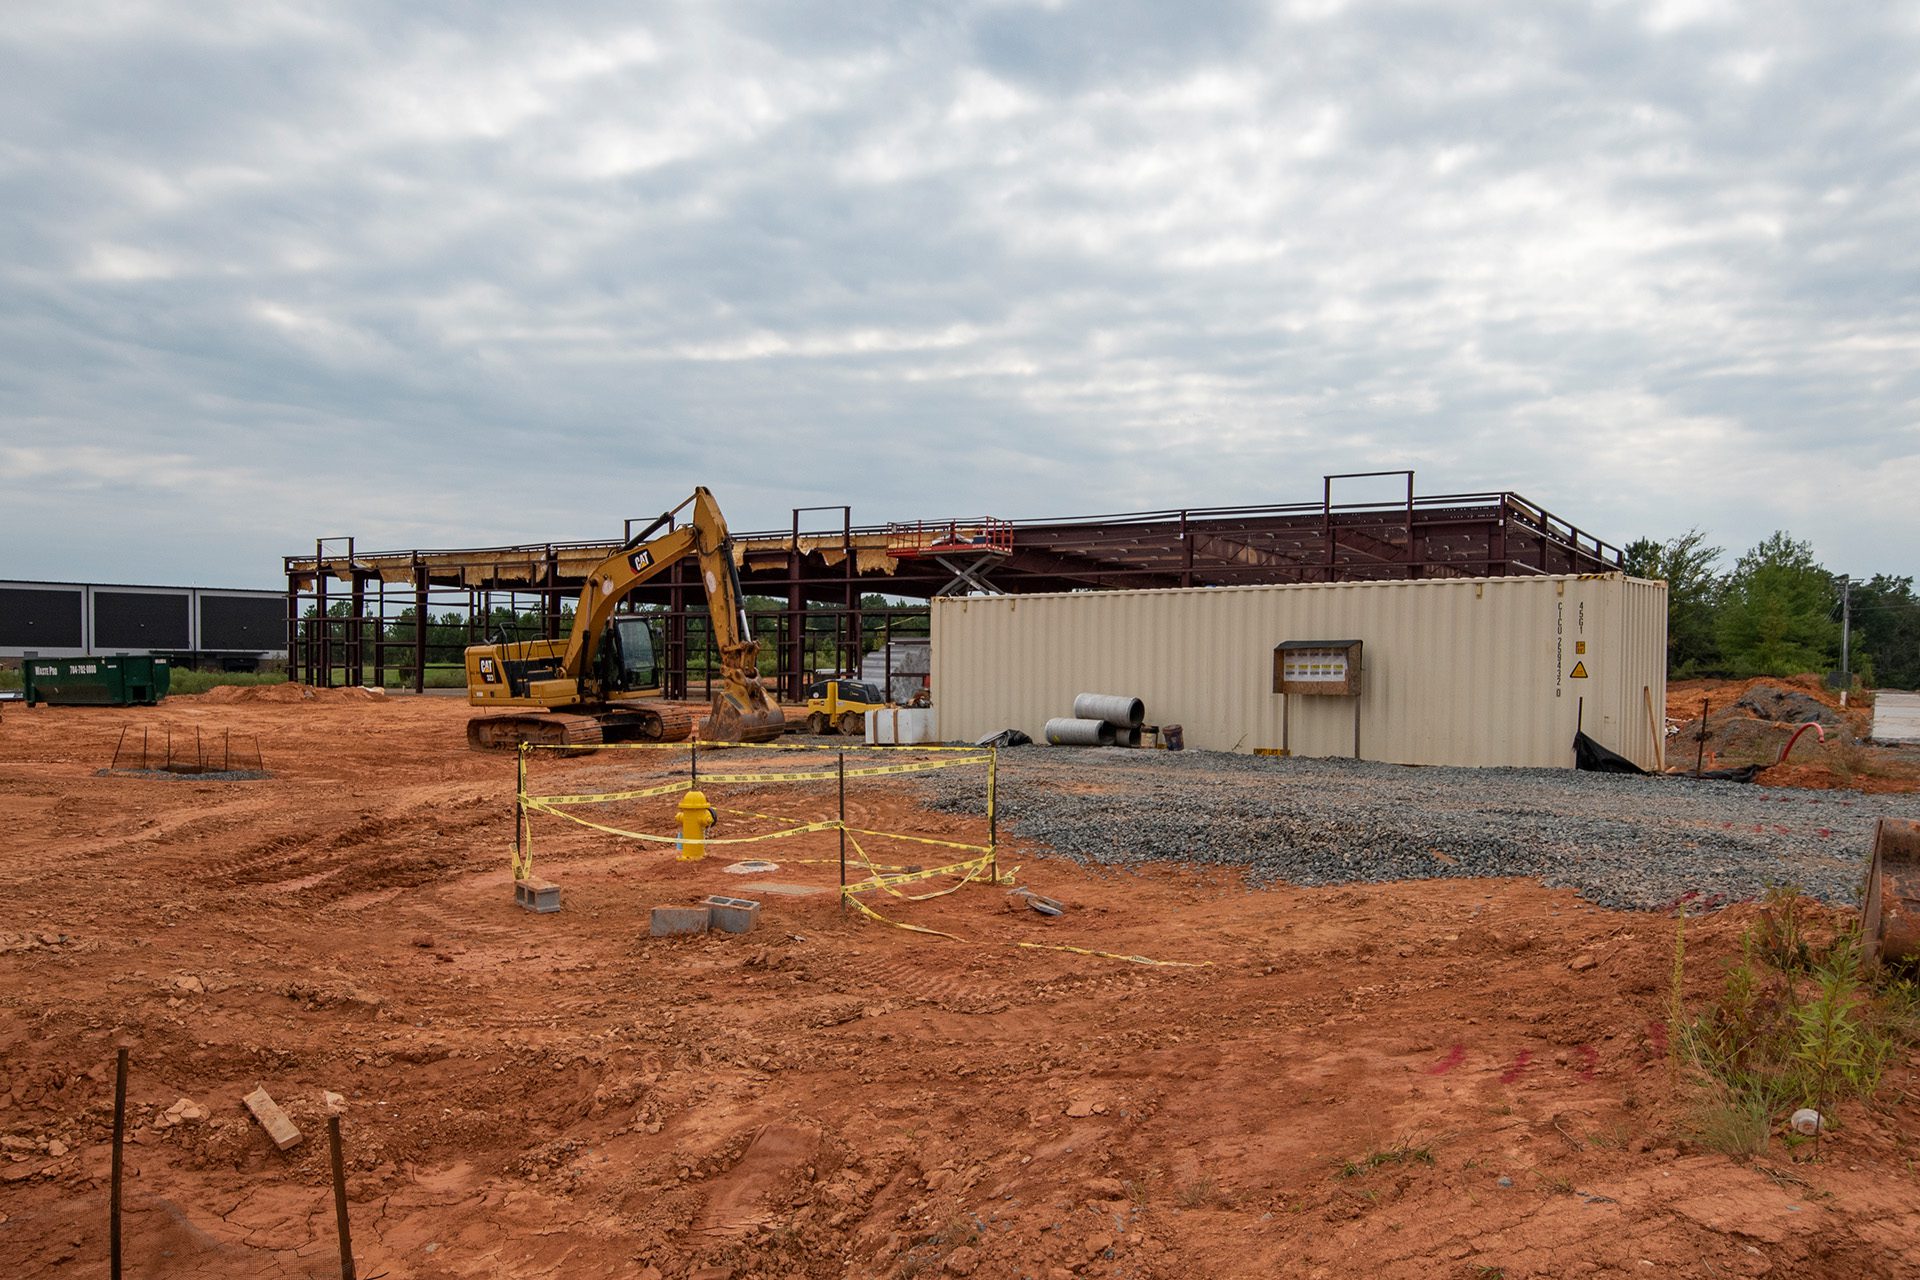 flex building under construction with red dirt on ground and steel up, construction equipment and trailer